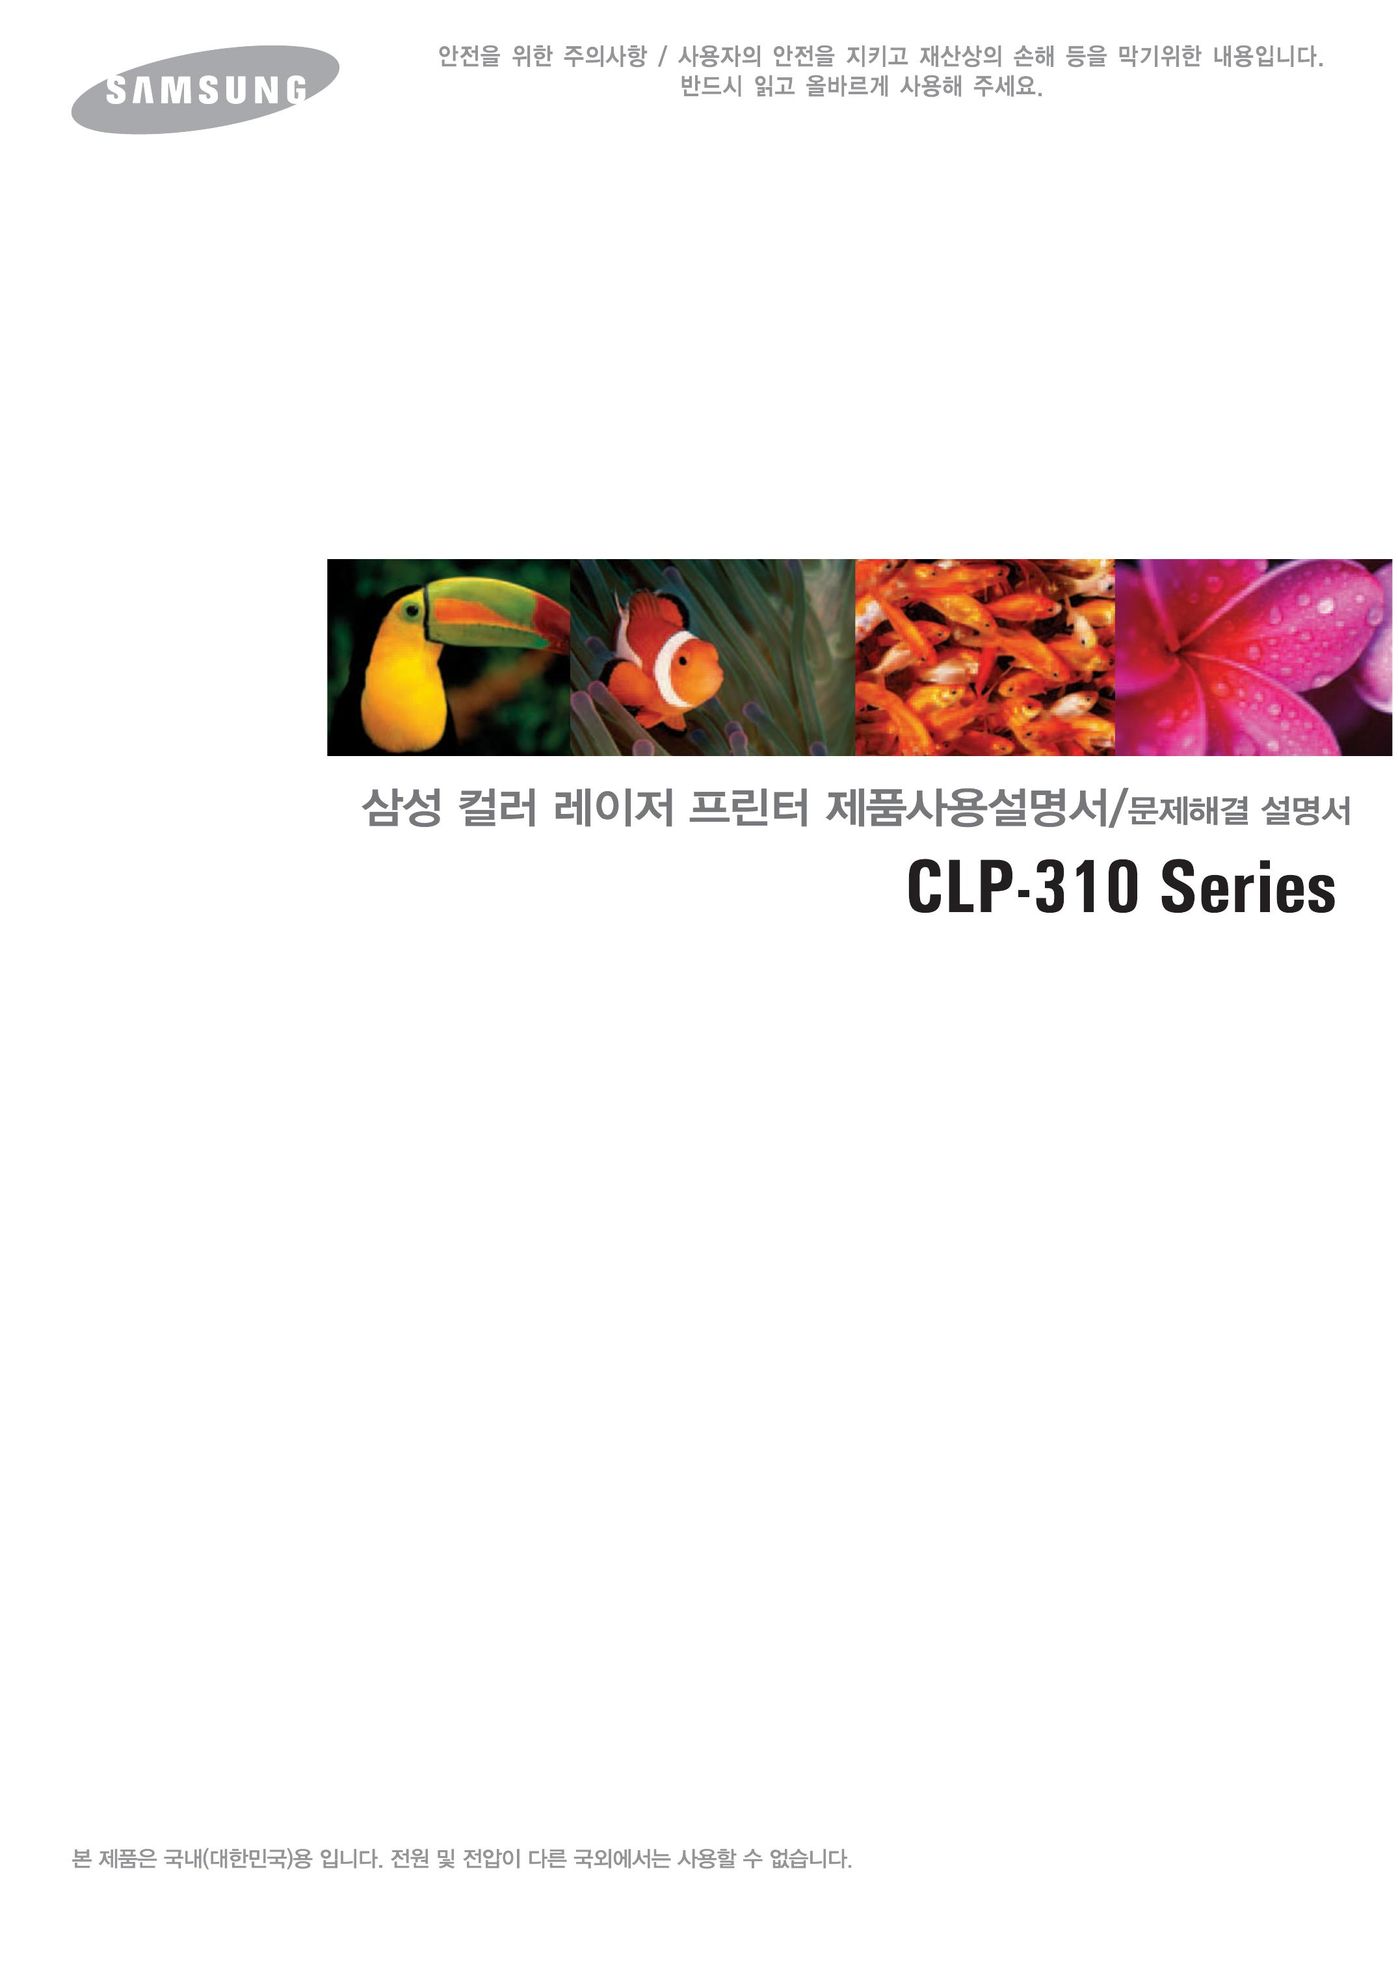 Samsung CLP-310WK All in One Printer User Manual